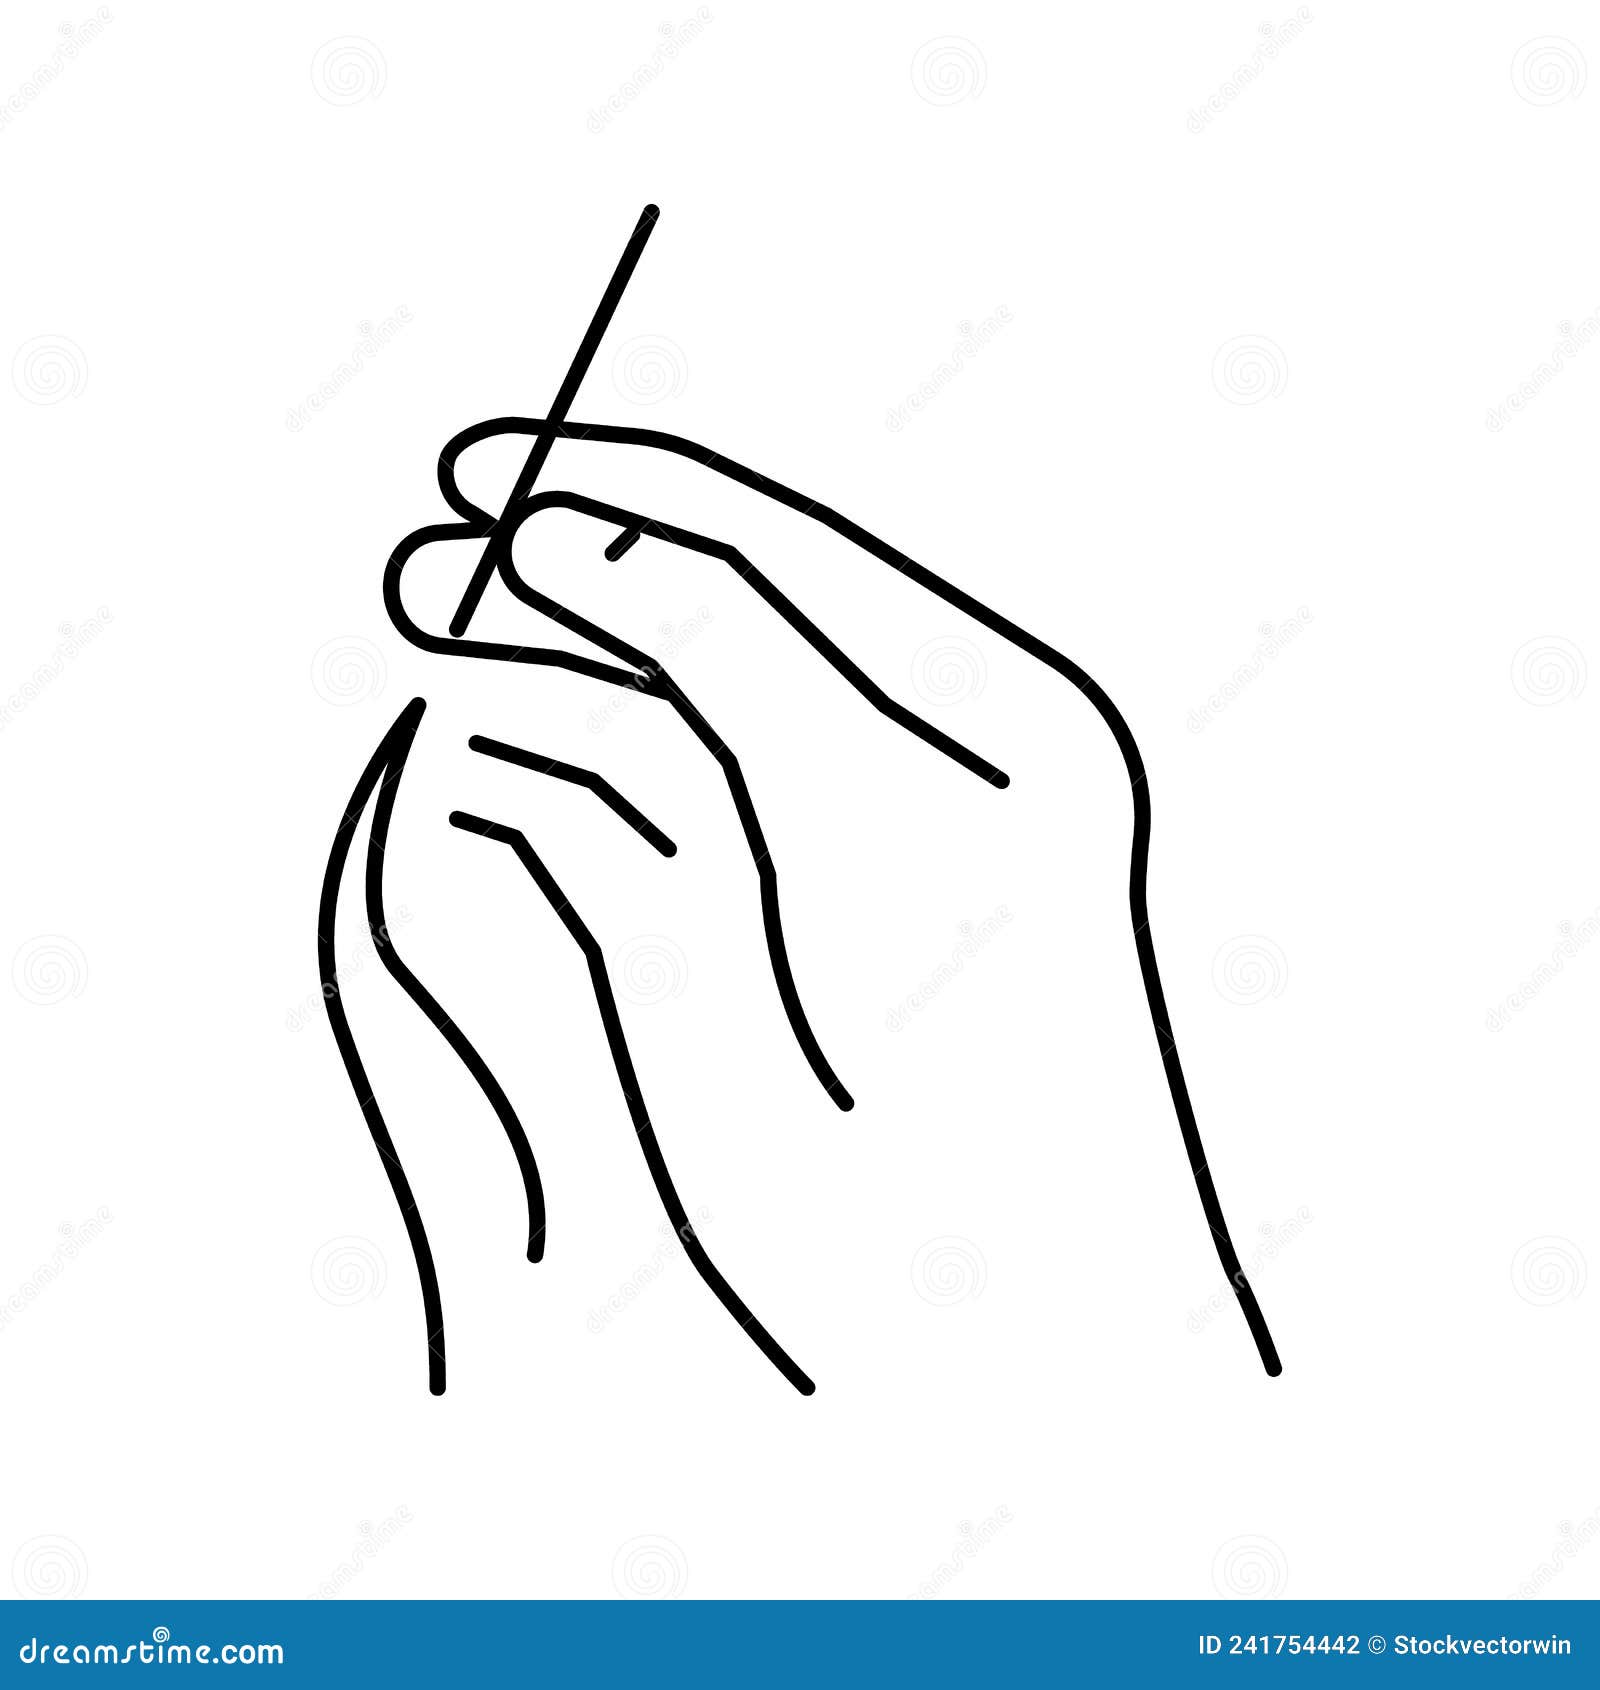 Sewing Hand Holding Needle with Thread Line Icon Vector Illustration ...